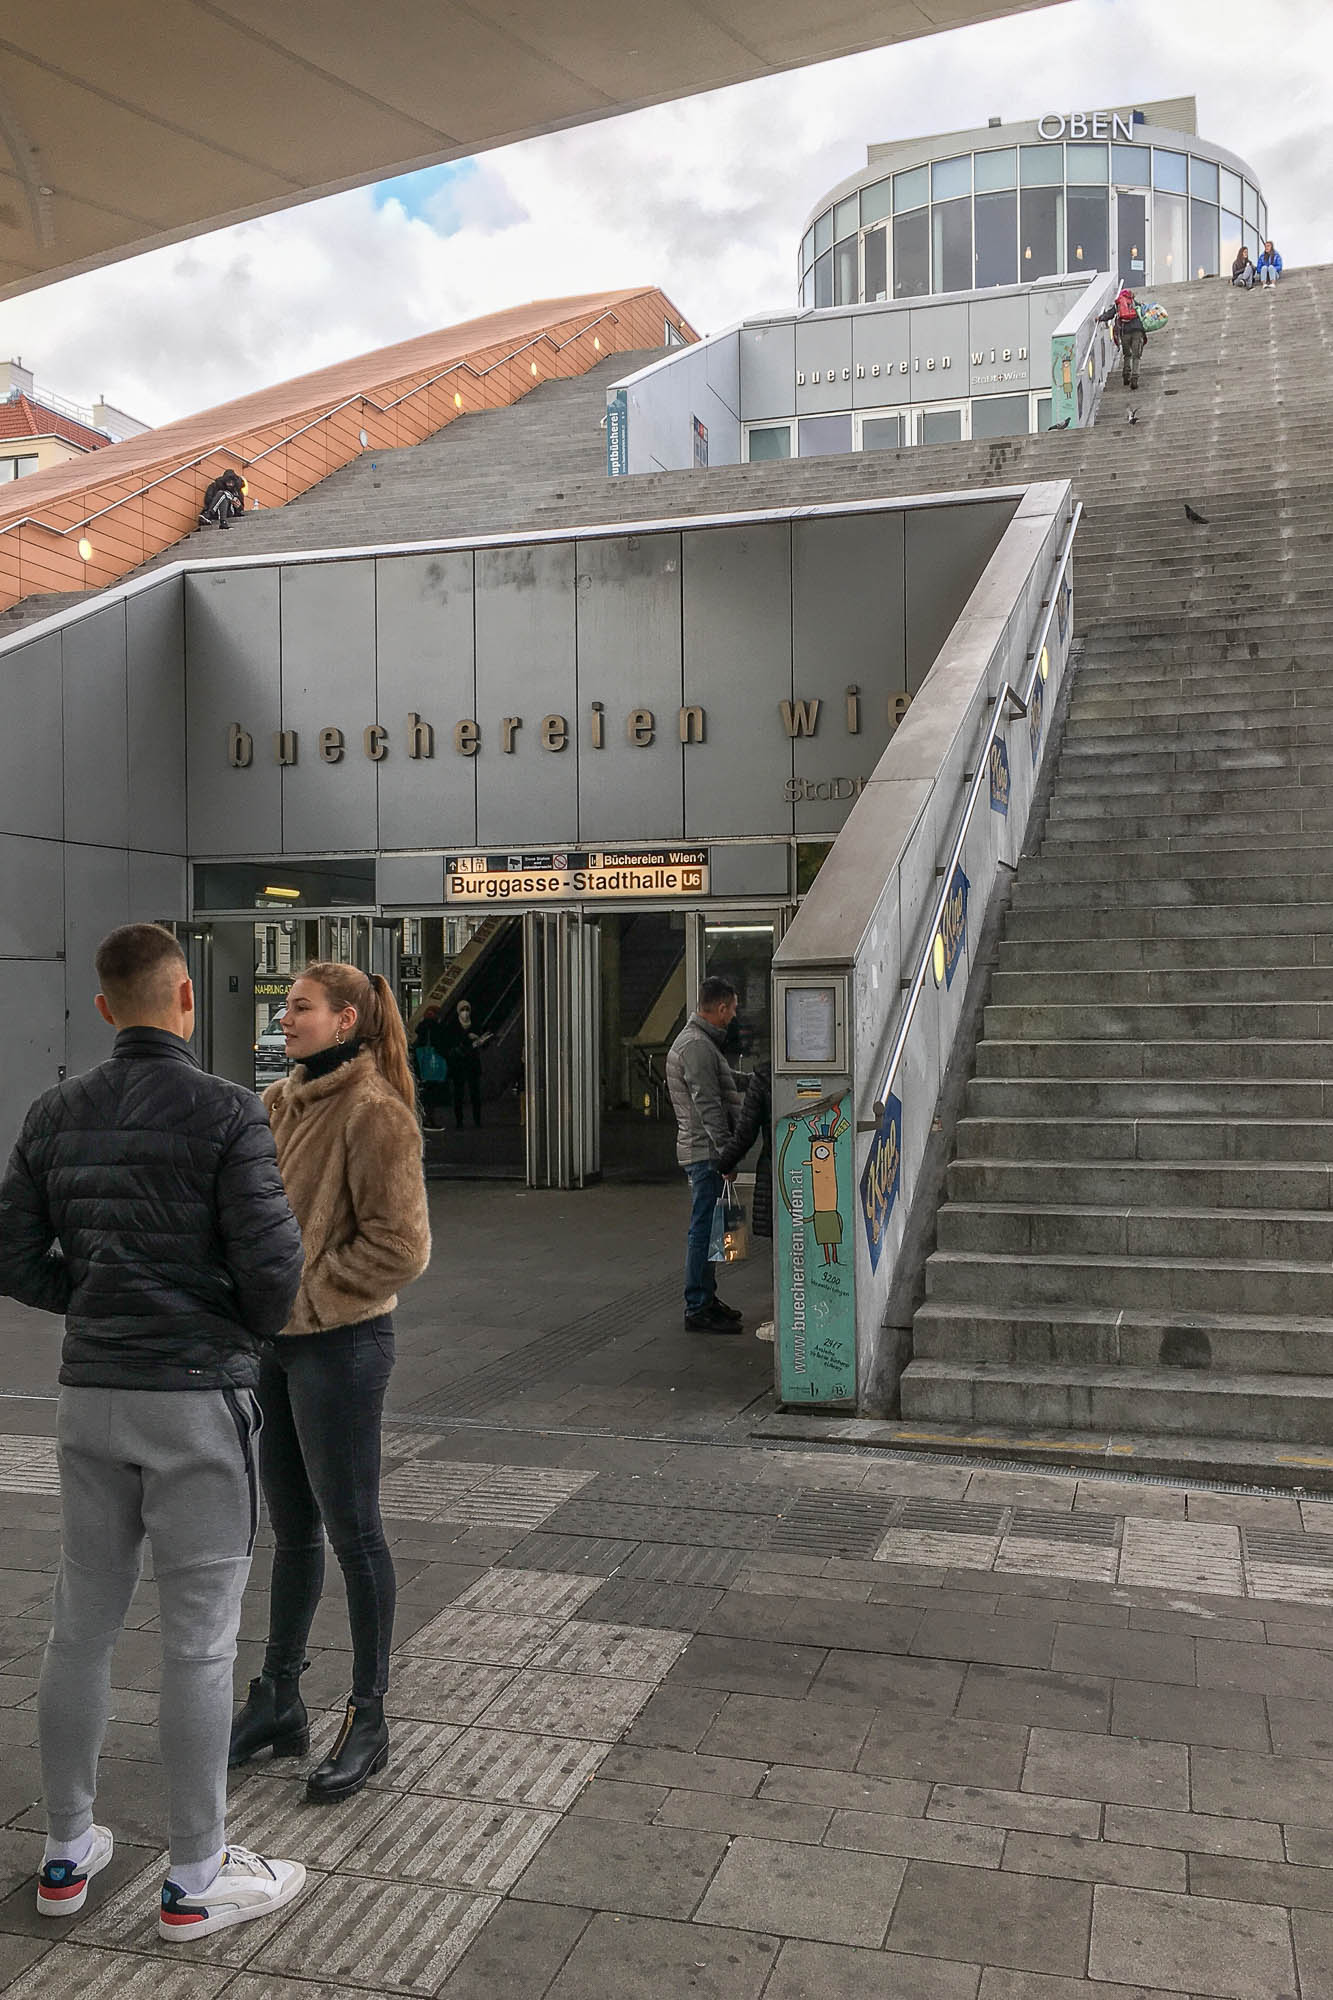 Exterior view of a large set of stairs, split in half to provide access to a subway station marked Burggasse-Stadthalle. On top of the subway entrance is another entrance to the library marked Buechereien Wien. A couple stands in the foreground.